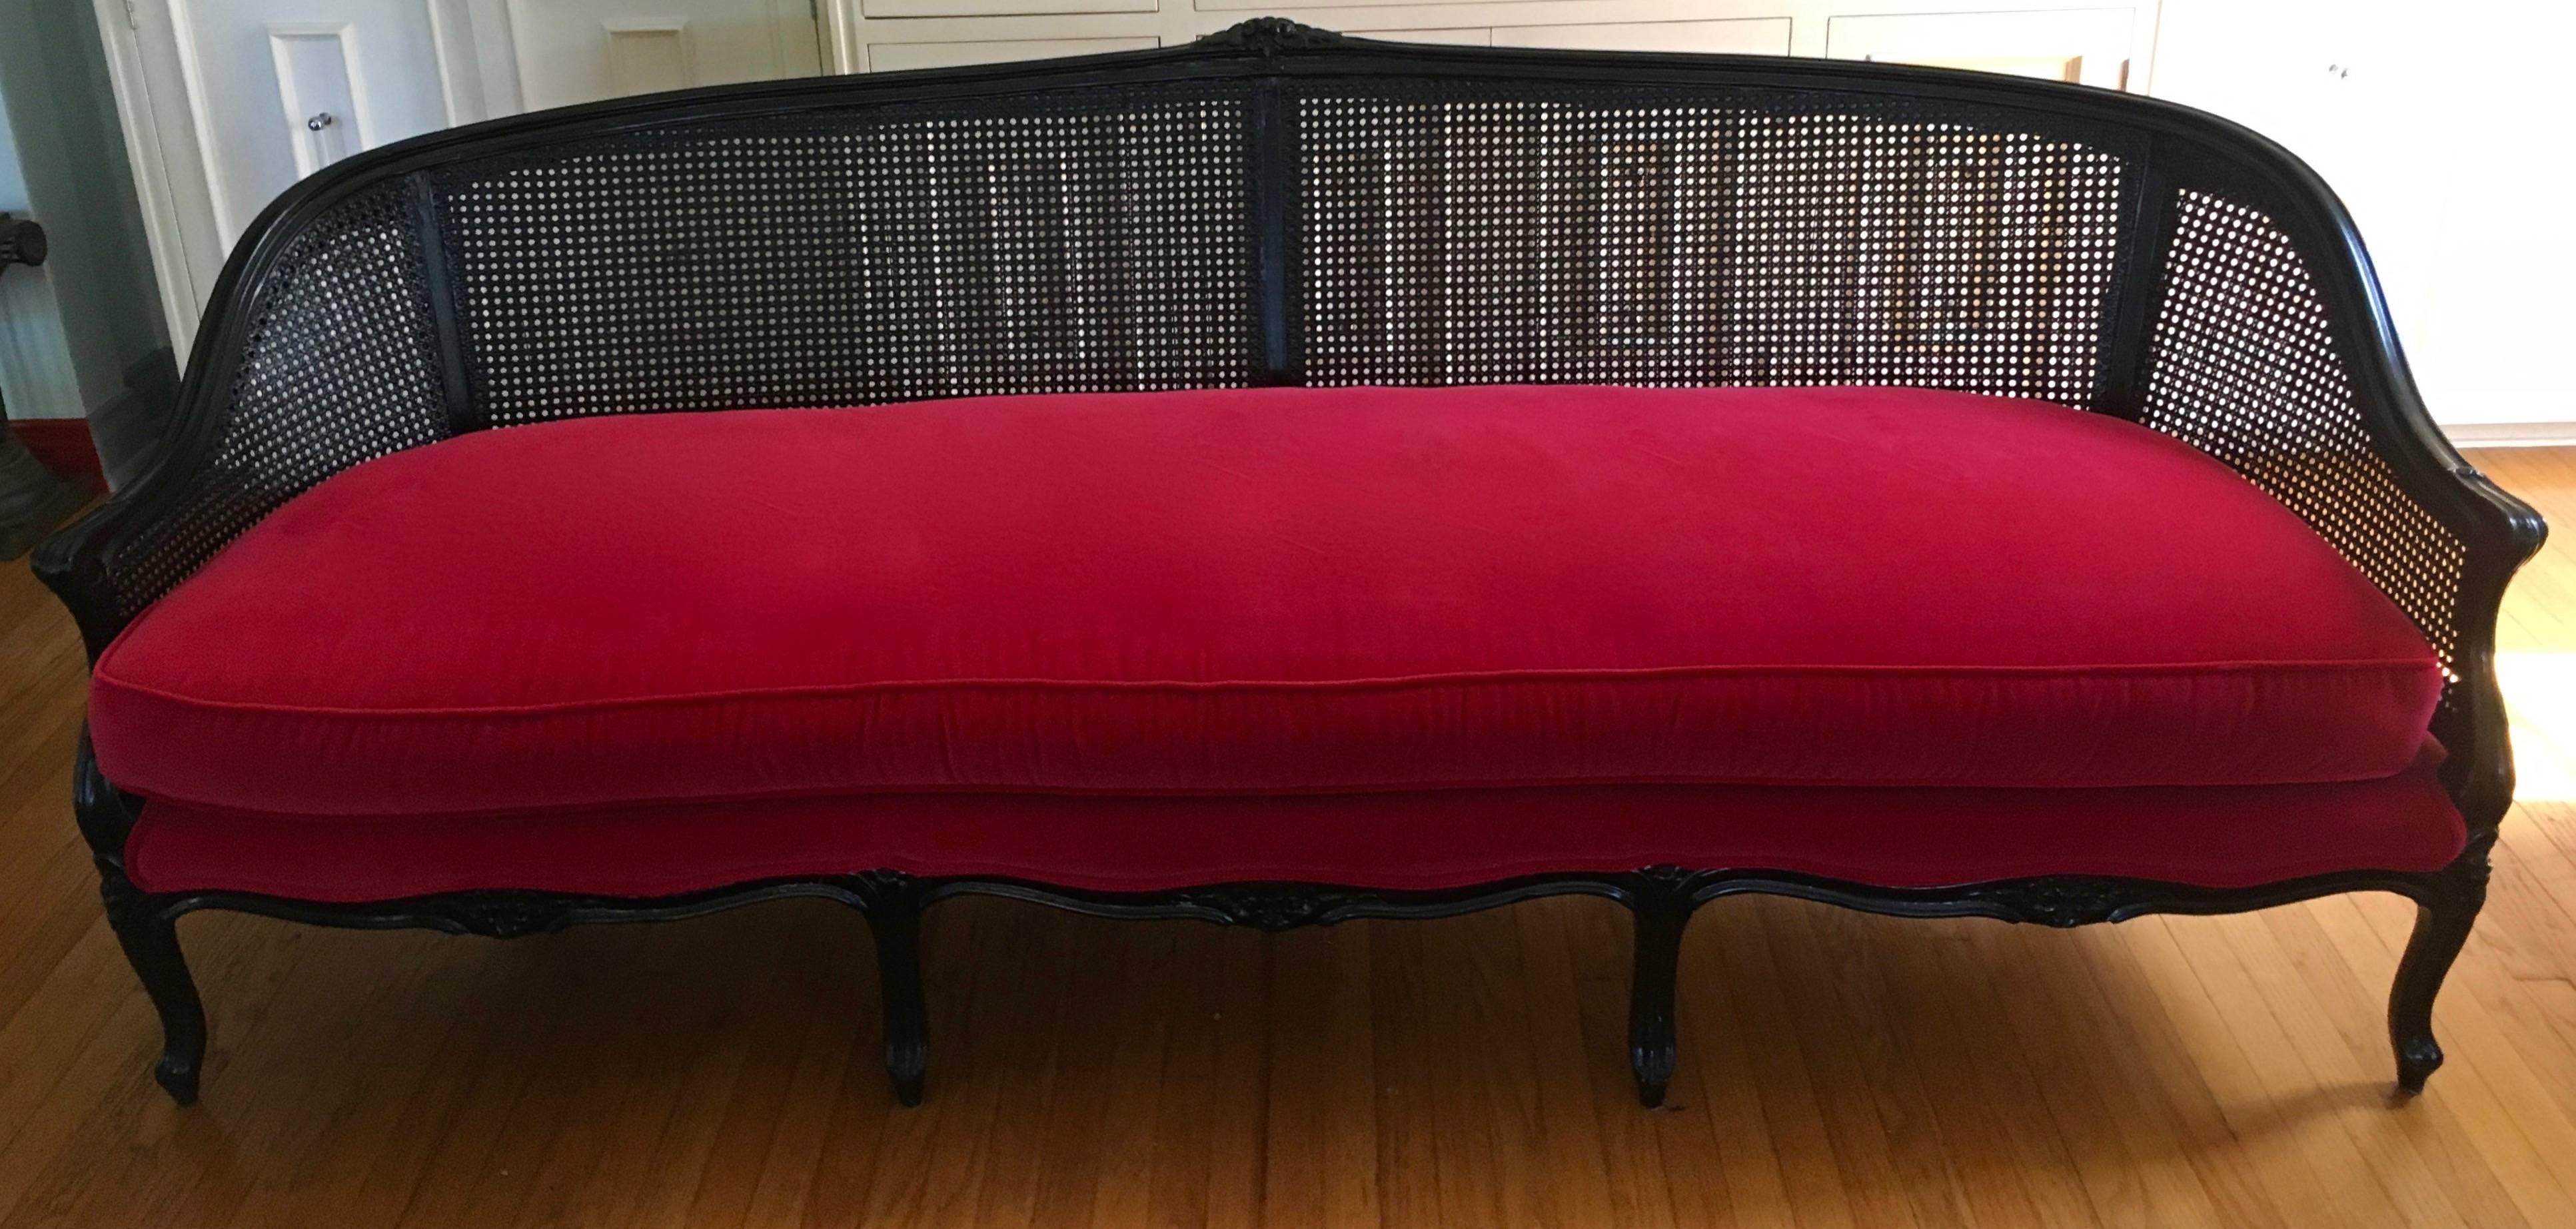 Early 20th century cane back sofa. Pillows and cushions are upholstered in Red Belgian velvet - each pillow has a bouclé fabric in a light pink / red alternate back.

The cushions and pillows are independent of the sofa - easy to re-upholster if